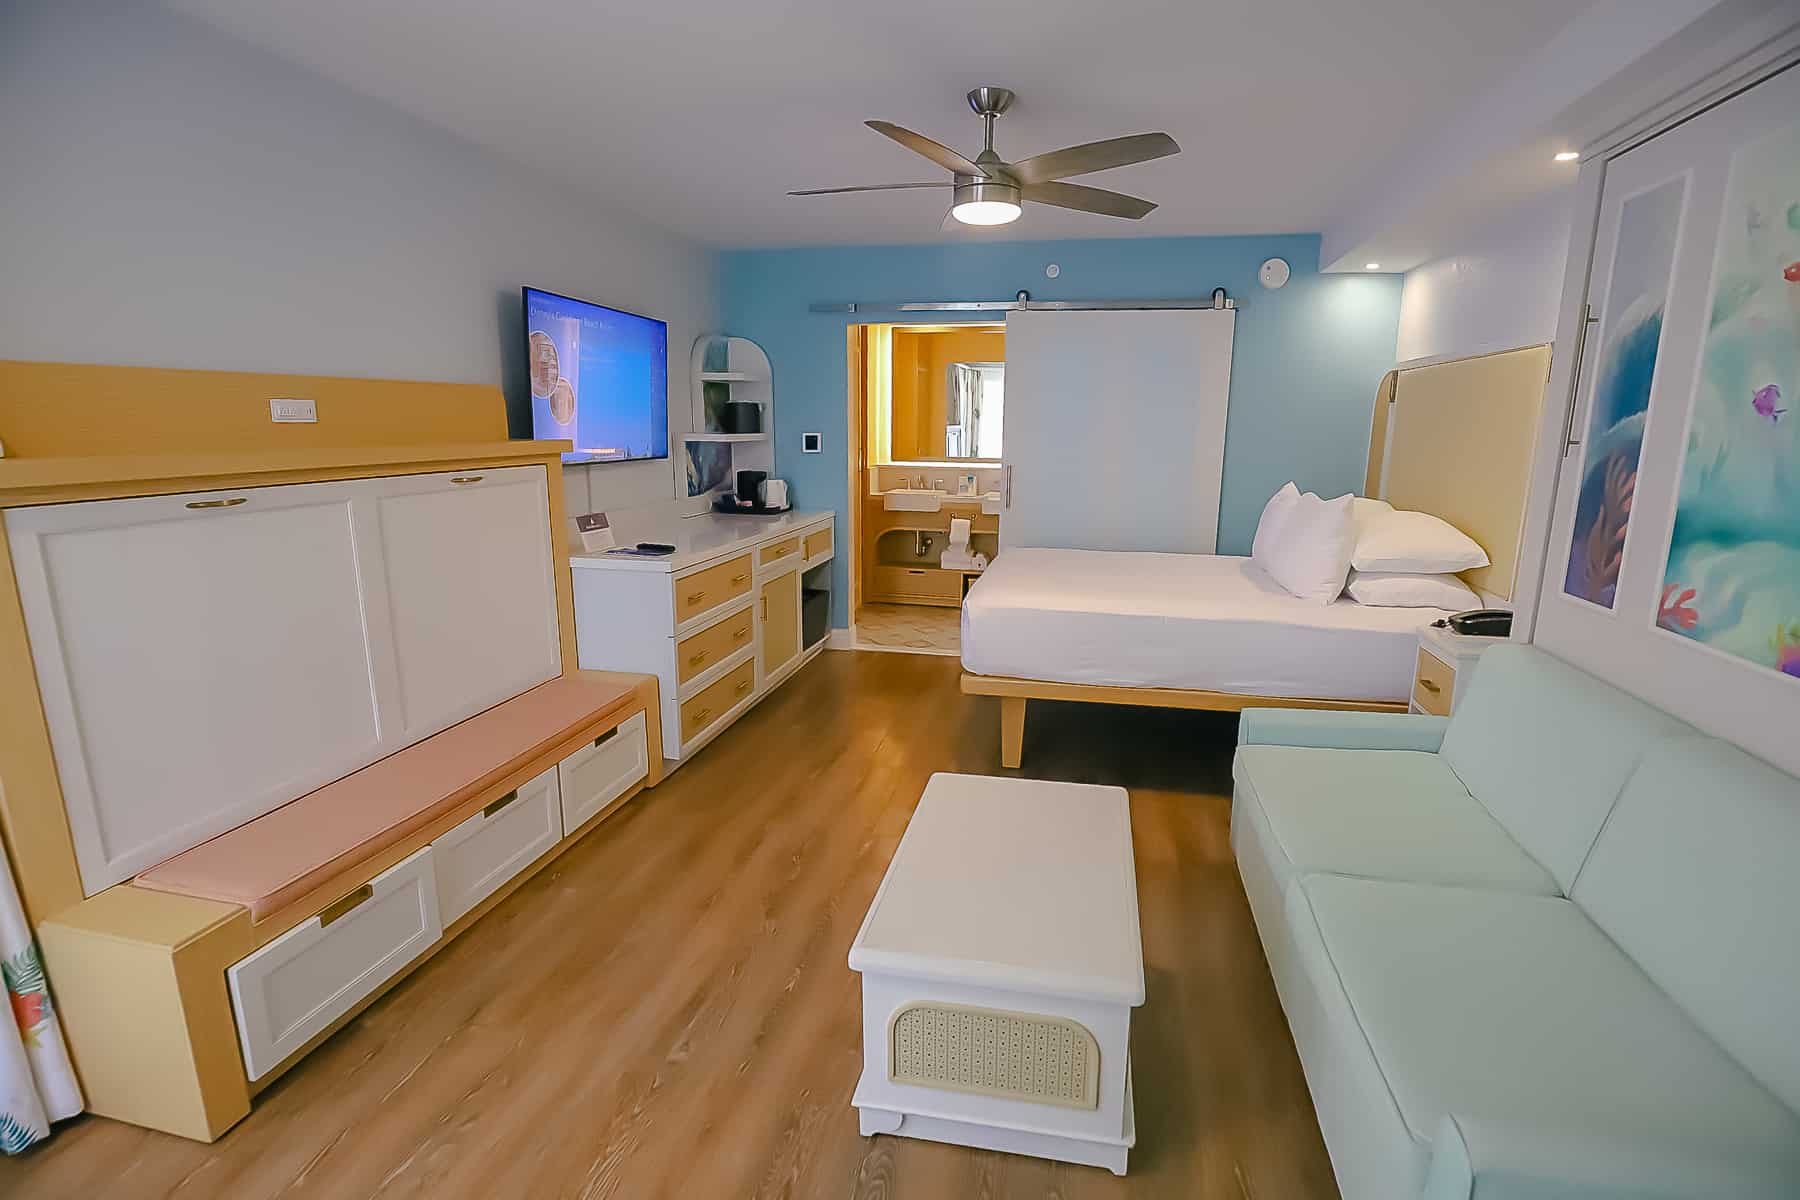 overview of a 'The Little Mermaid Room' at Disney's Caribbean Beach Resort